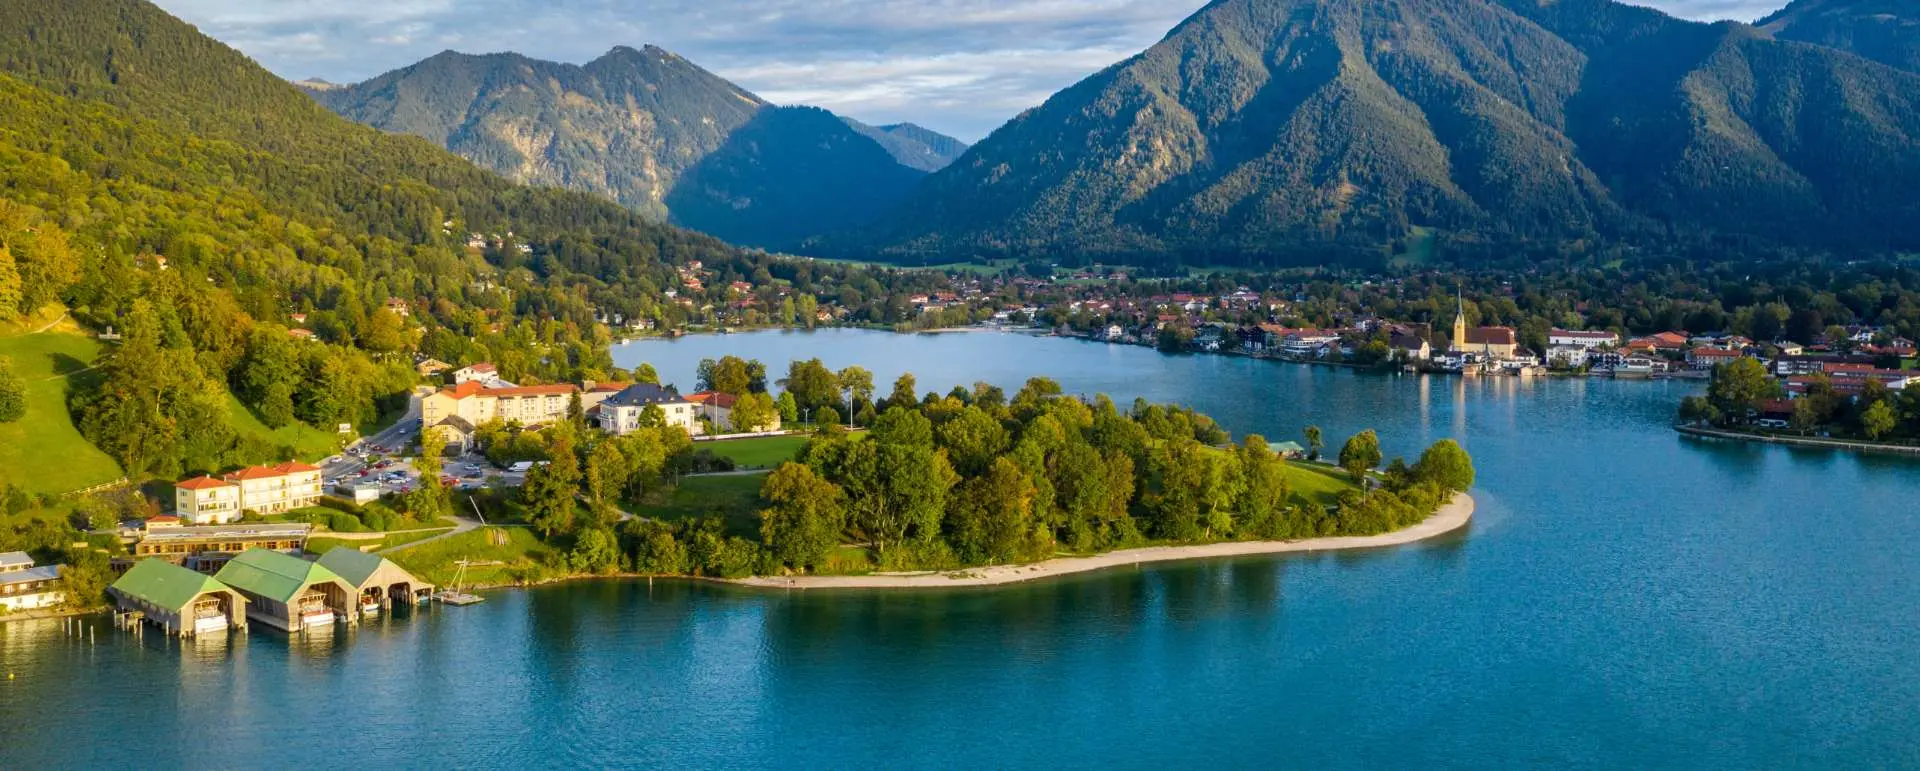 Tegernsee - the destination for group hotel for cyclists